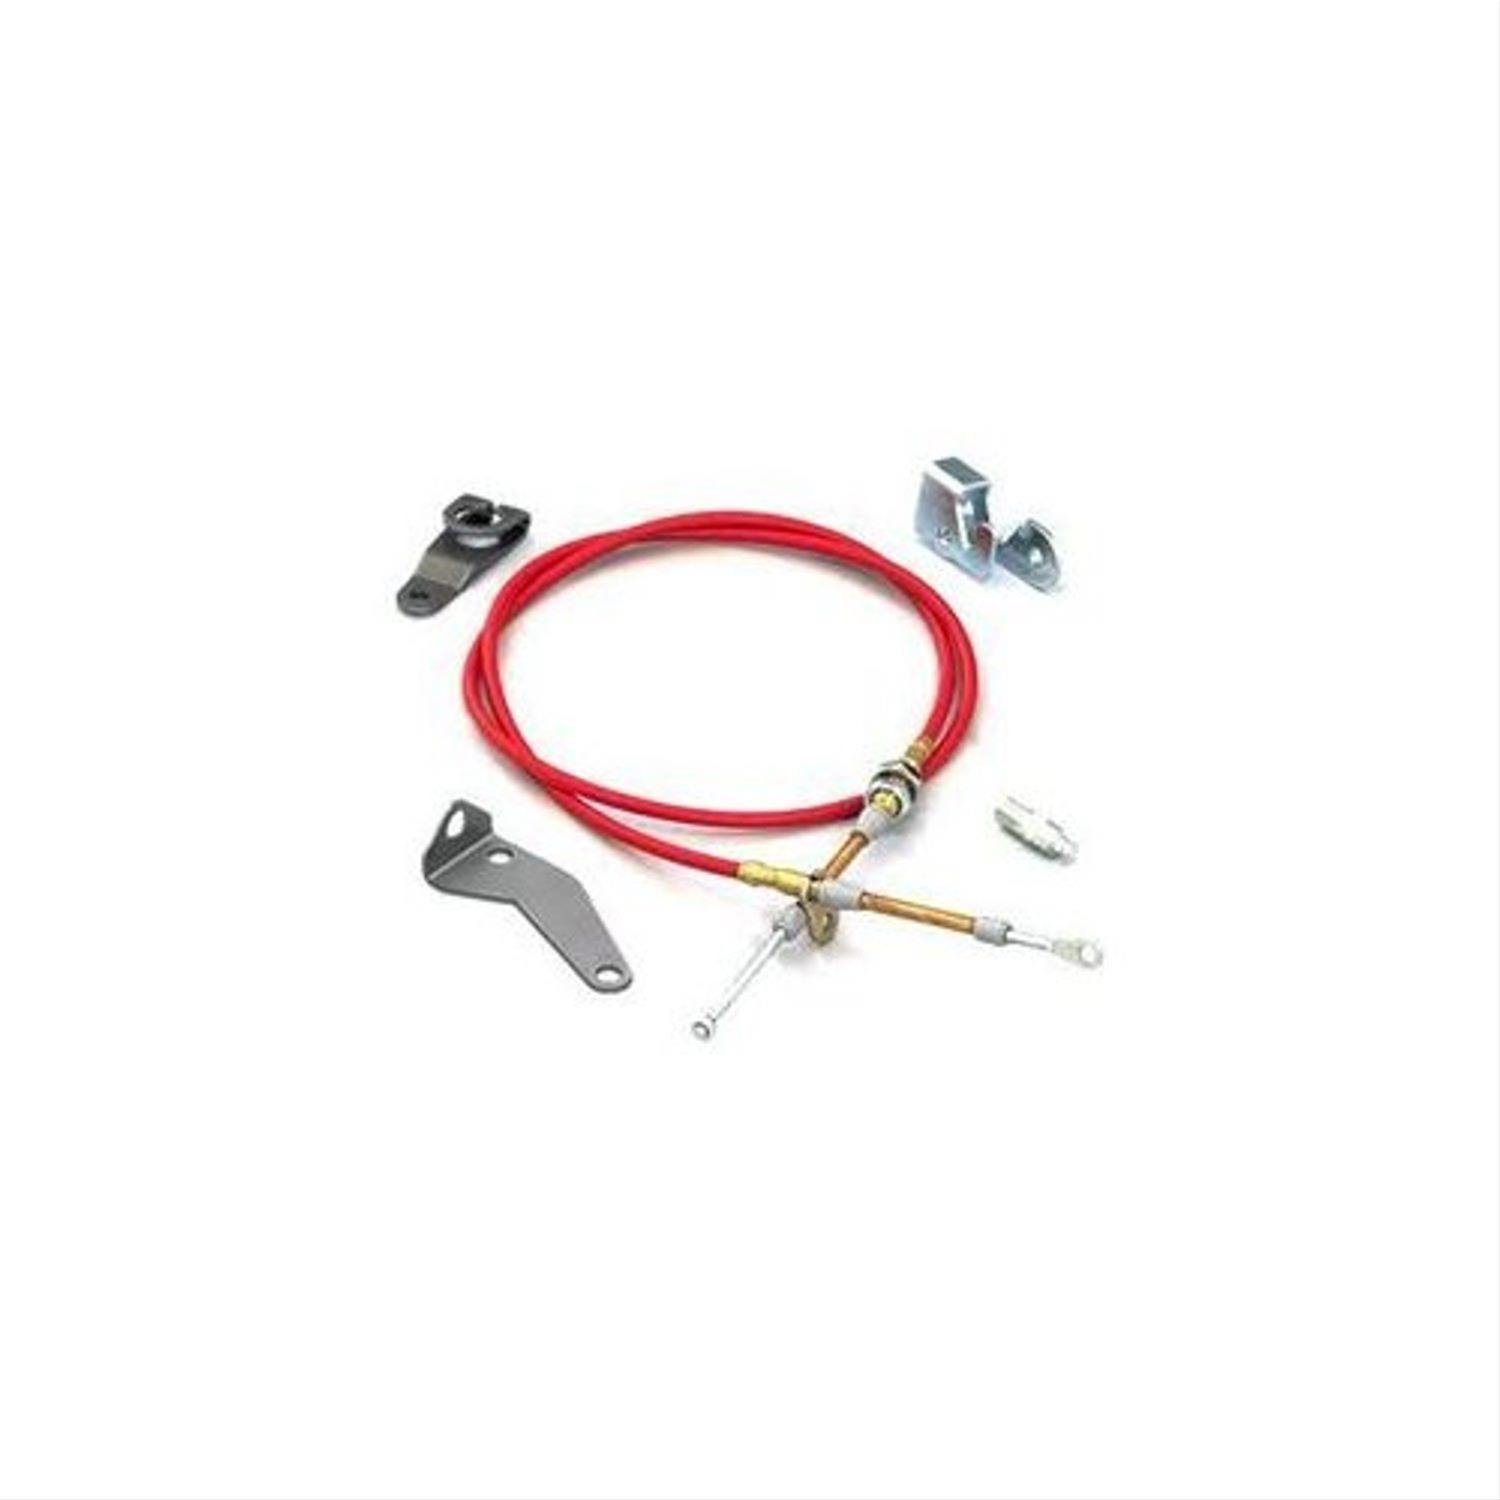 Hammer Shifter Installation Kit For Use With 130-81001